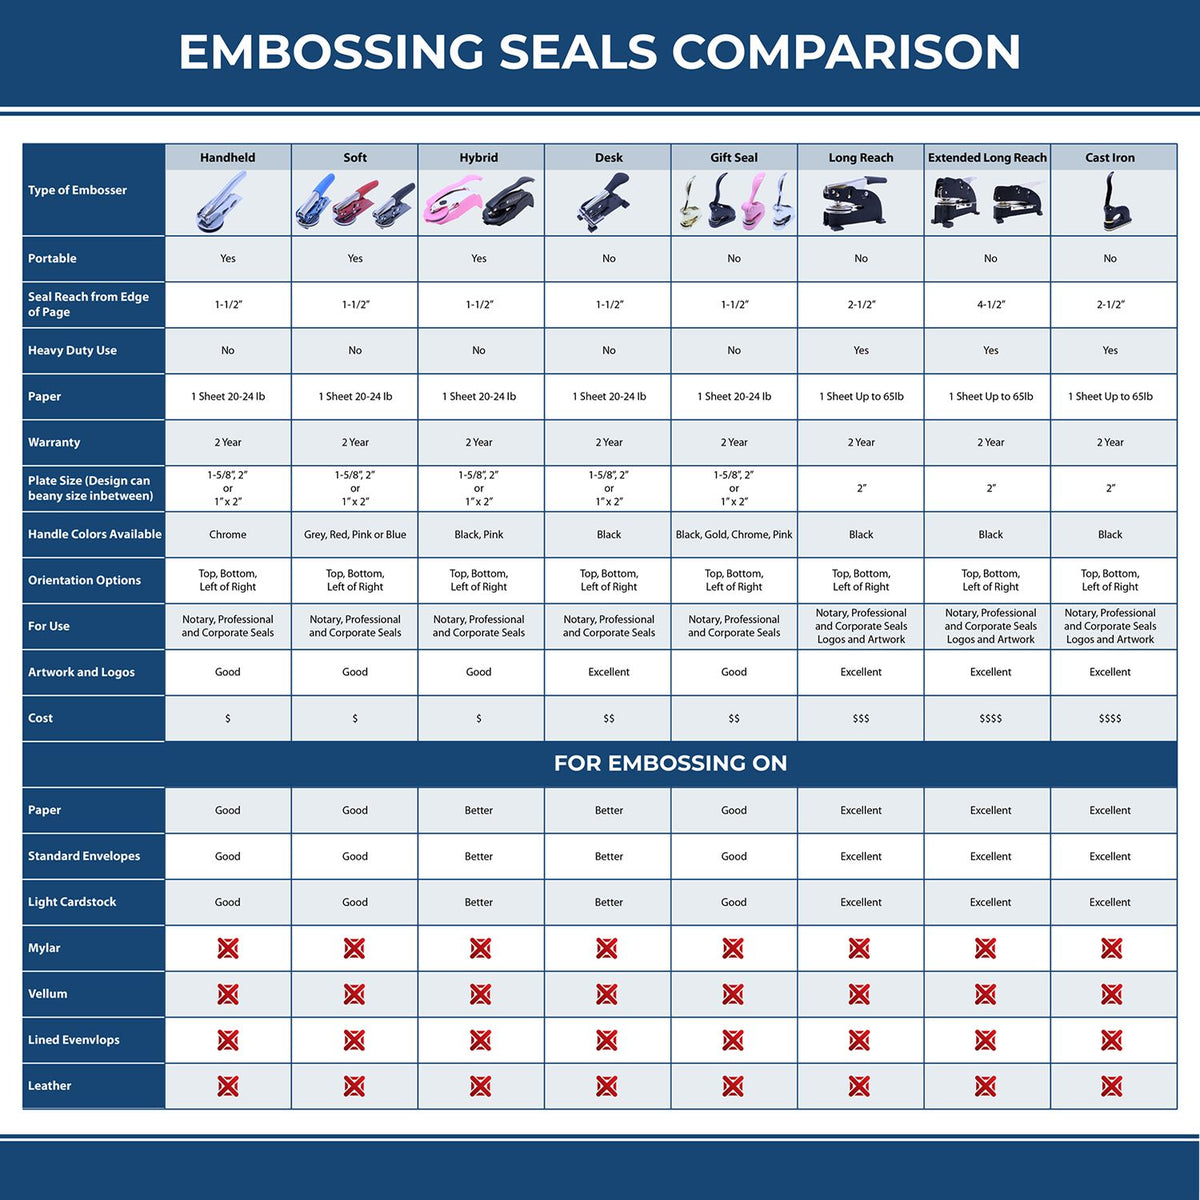 A comparison chart for the different types of mount models available for the Heavy Duty Cast Iron Vermont Geologist Seal Embosser